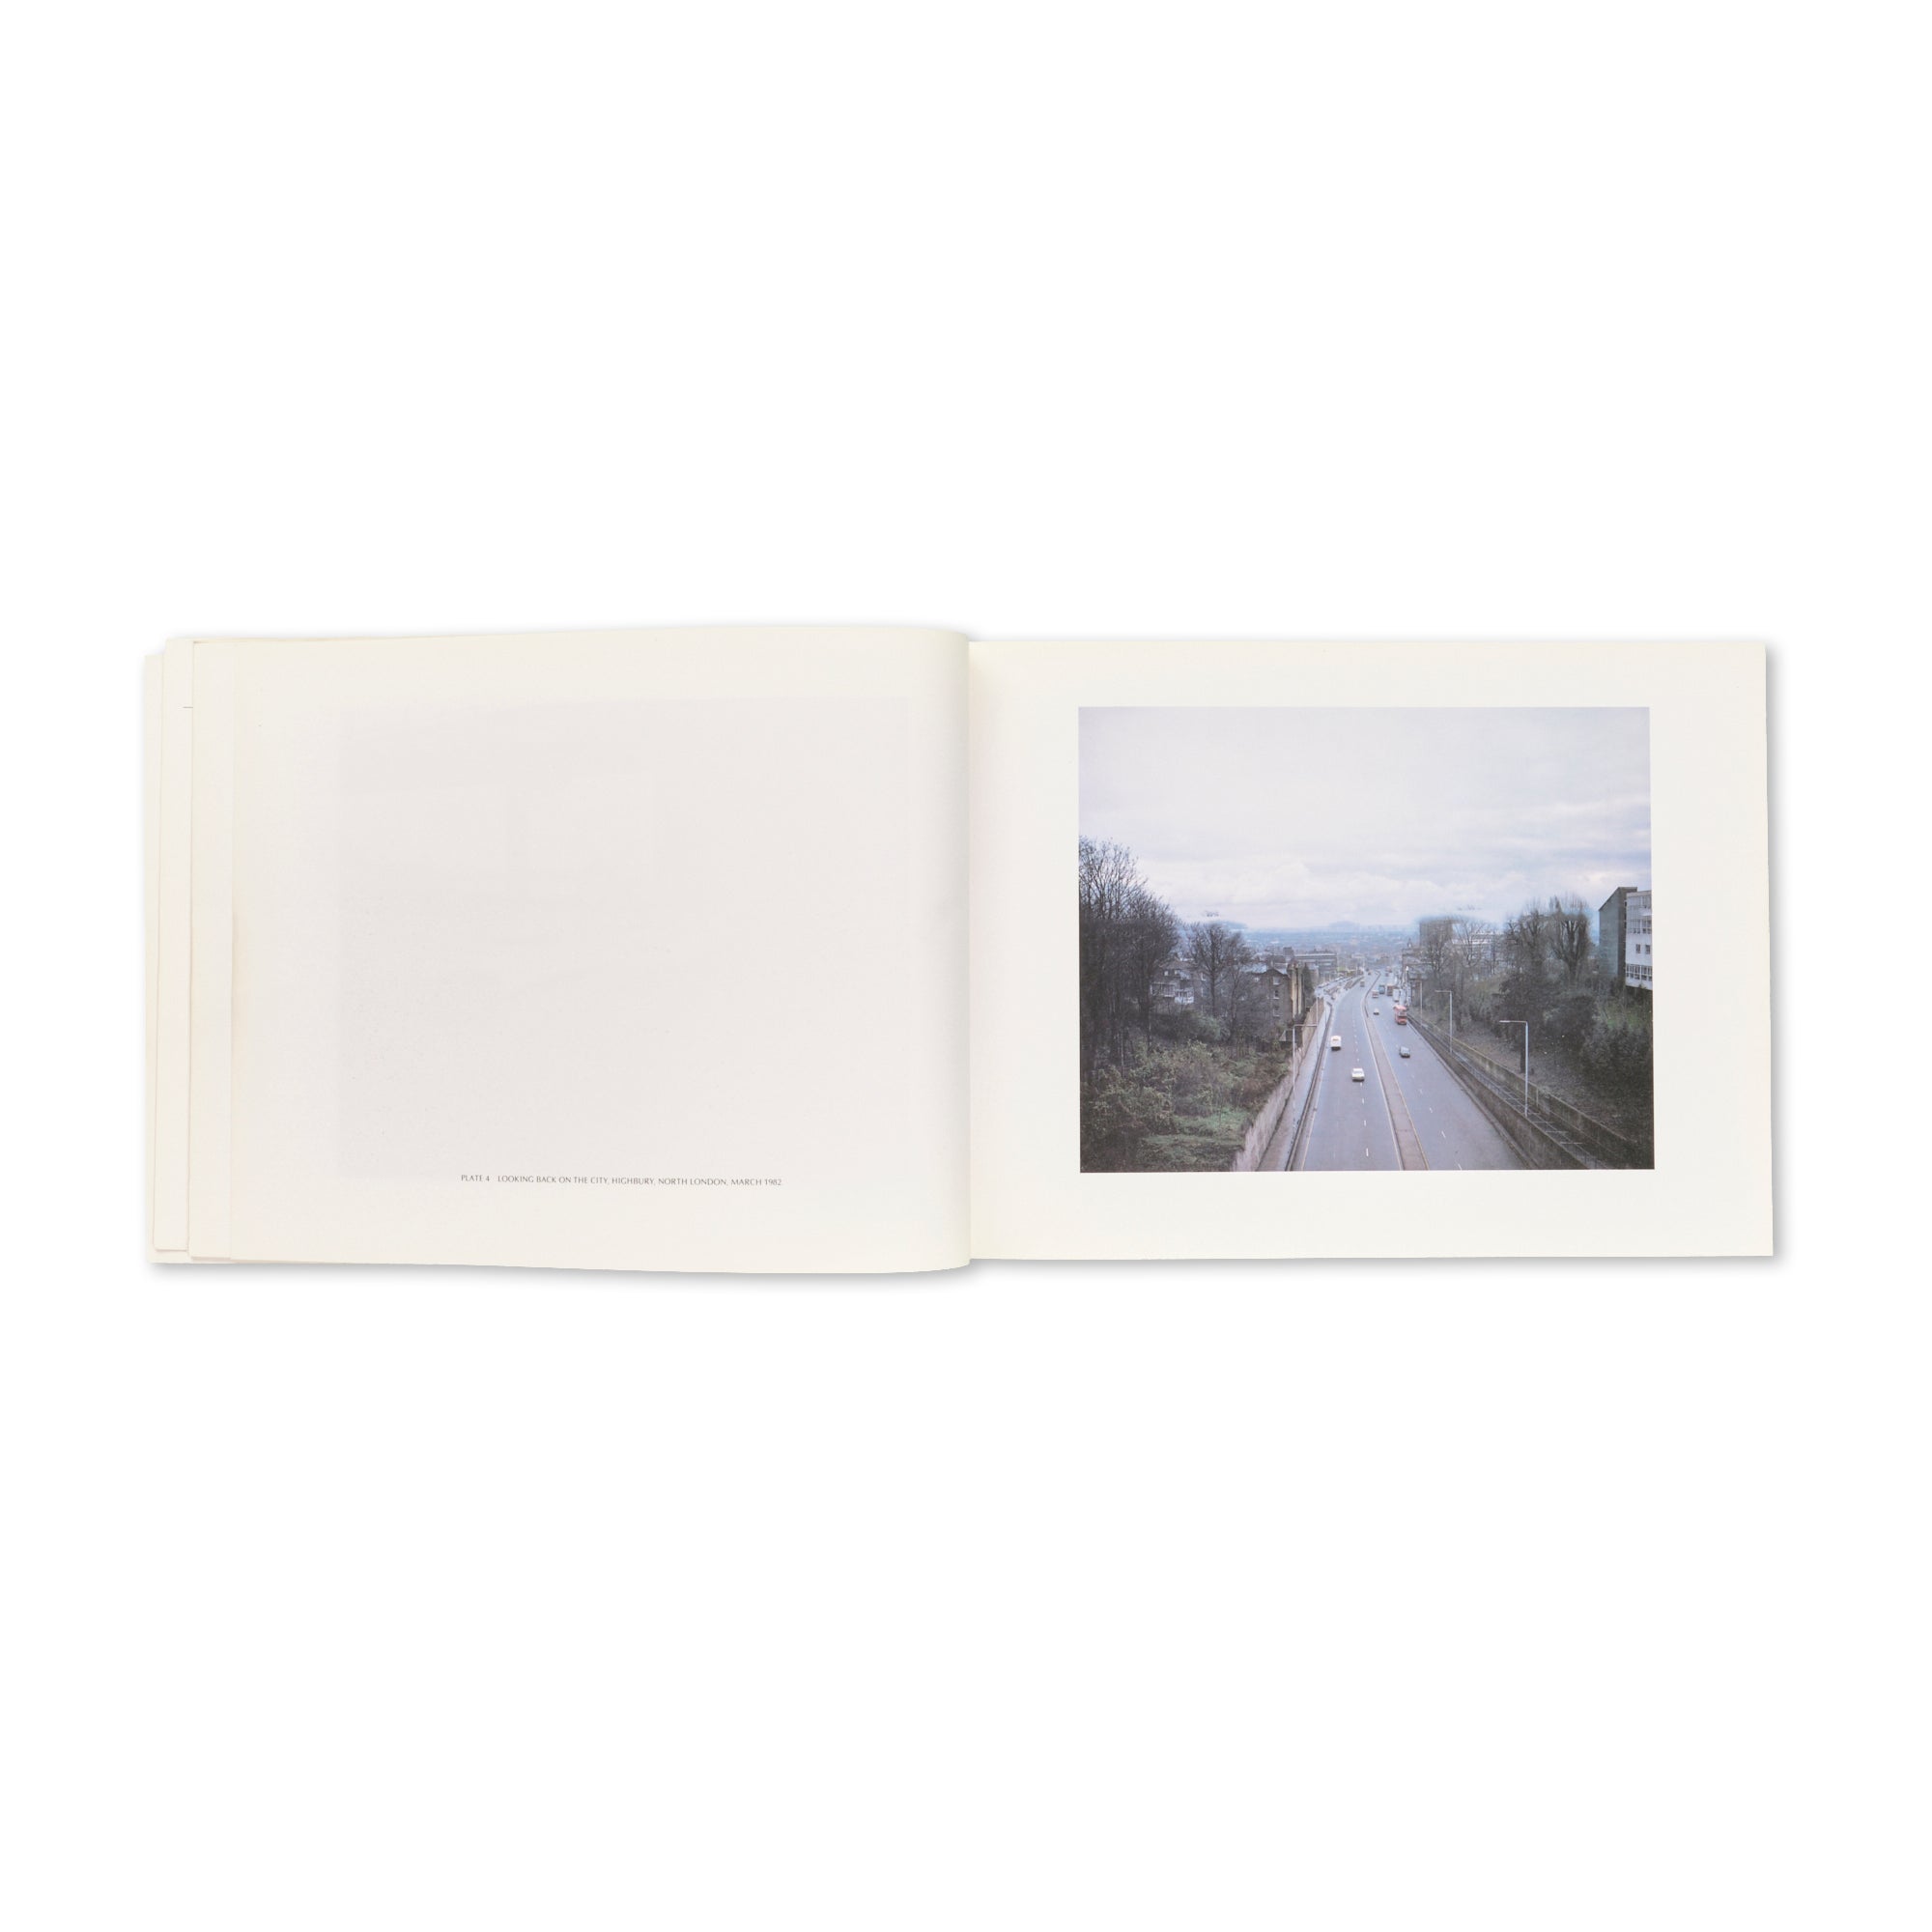 Paul Graham - A1: The Great North Road